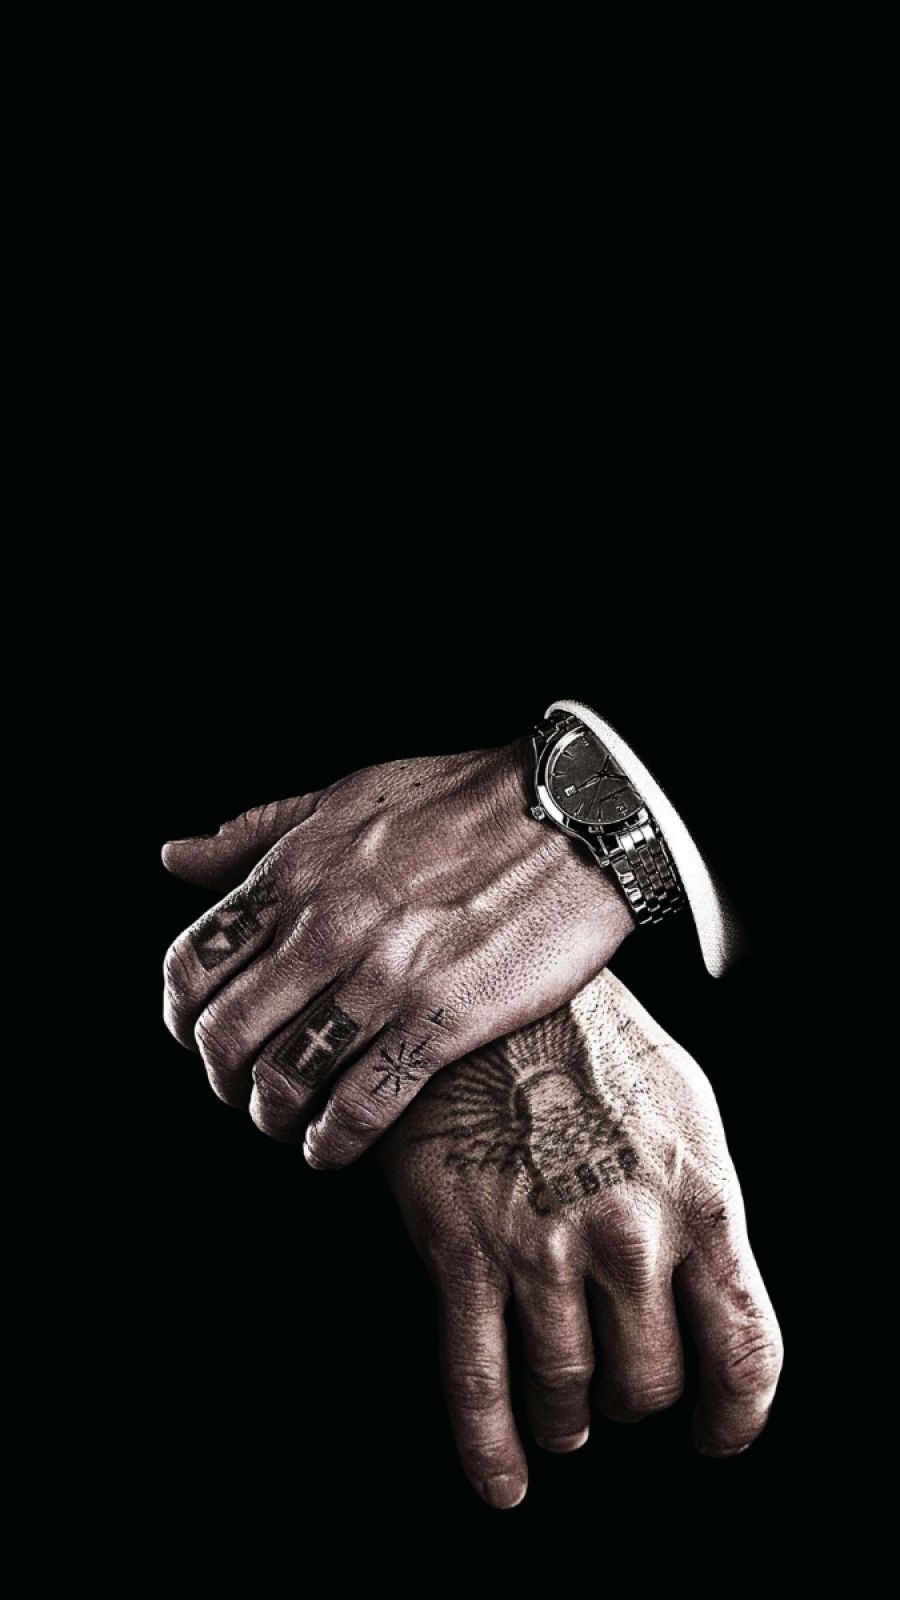 900x1600 Gangster iPhone Wallpaper - Top Free Gangster iPhone Background.